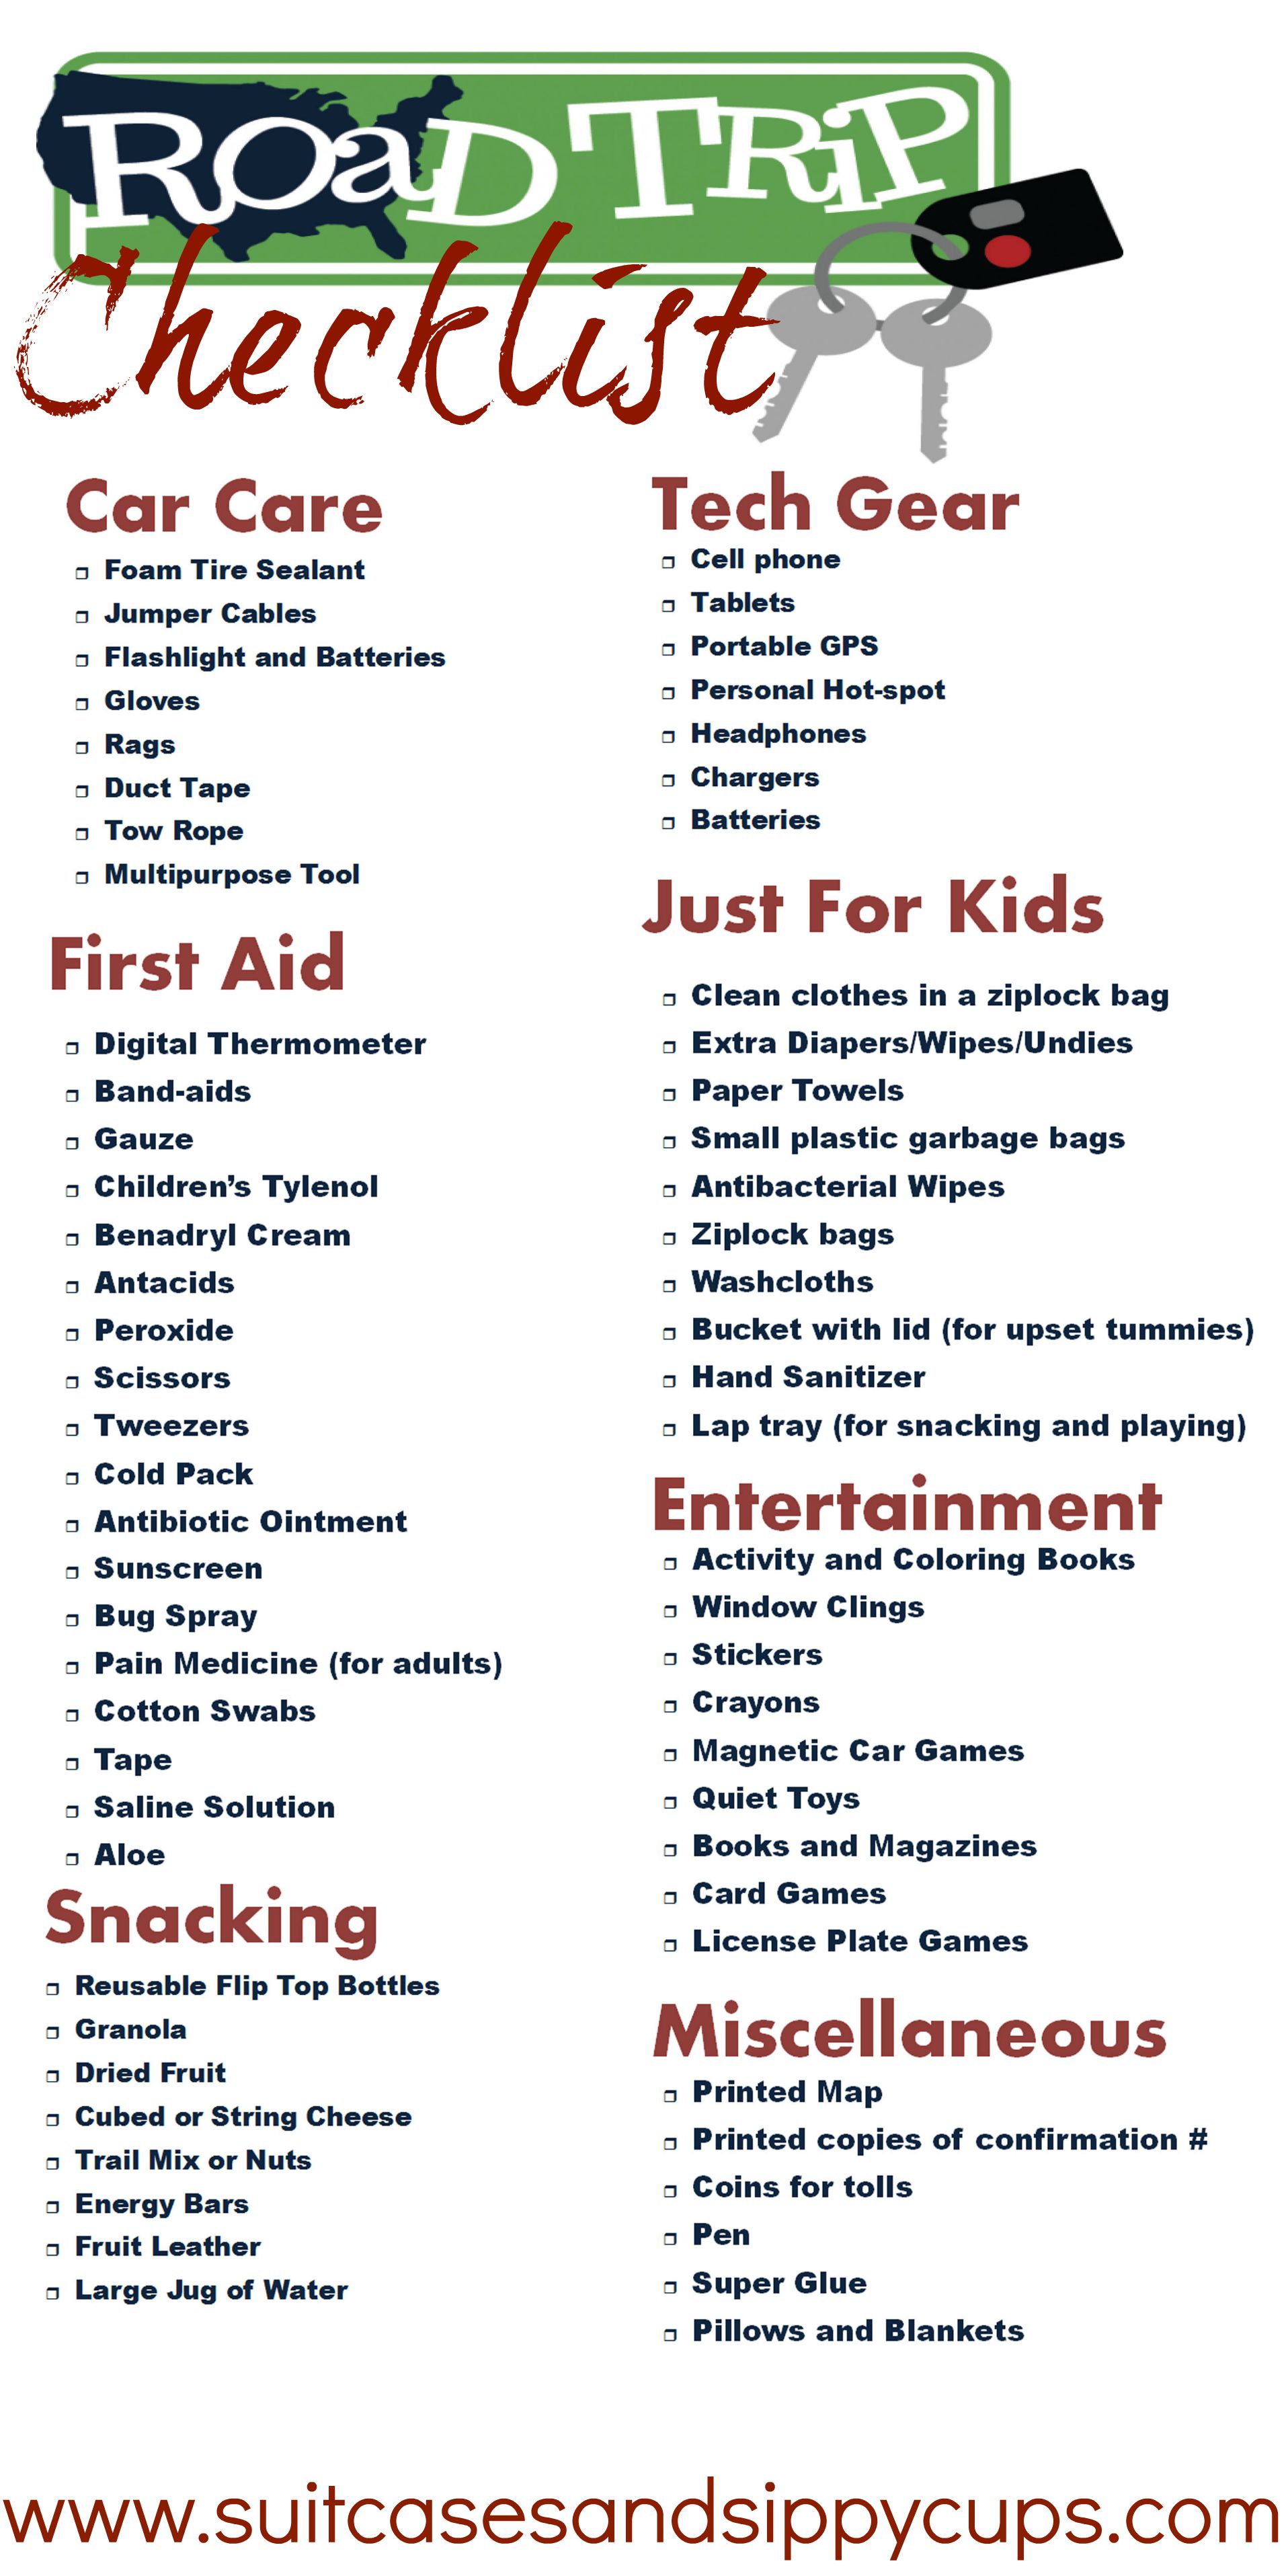 http://www.suitcasesandsippycups.com/wp-content/uploads/2015/08/road-trip-packing-with-kids-checklist.jpg